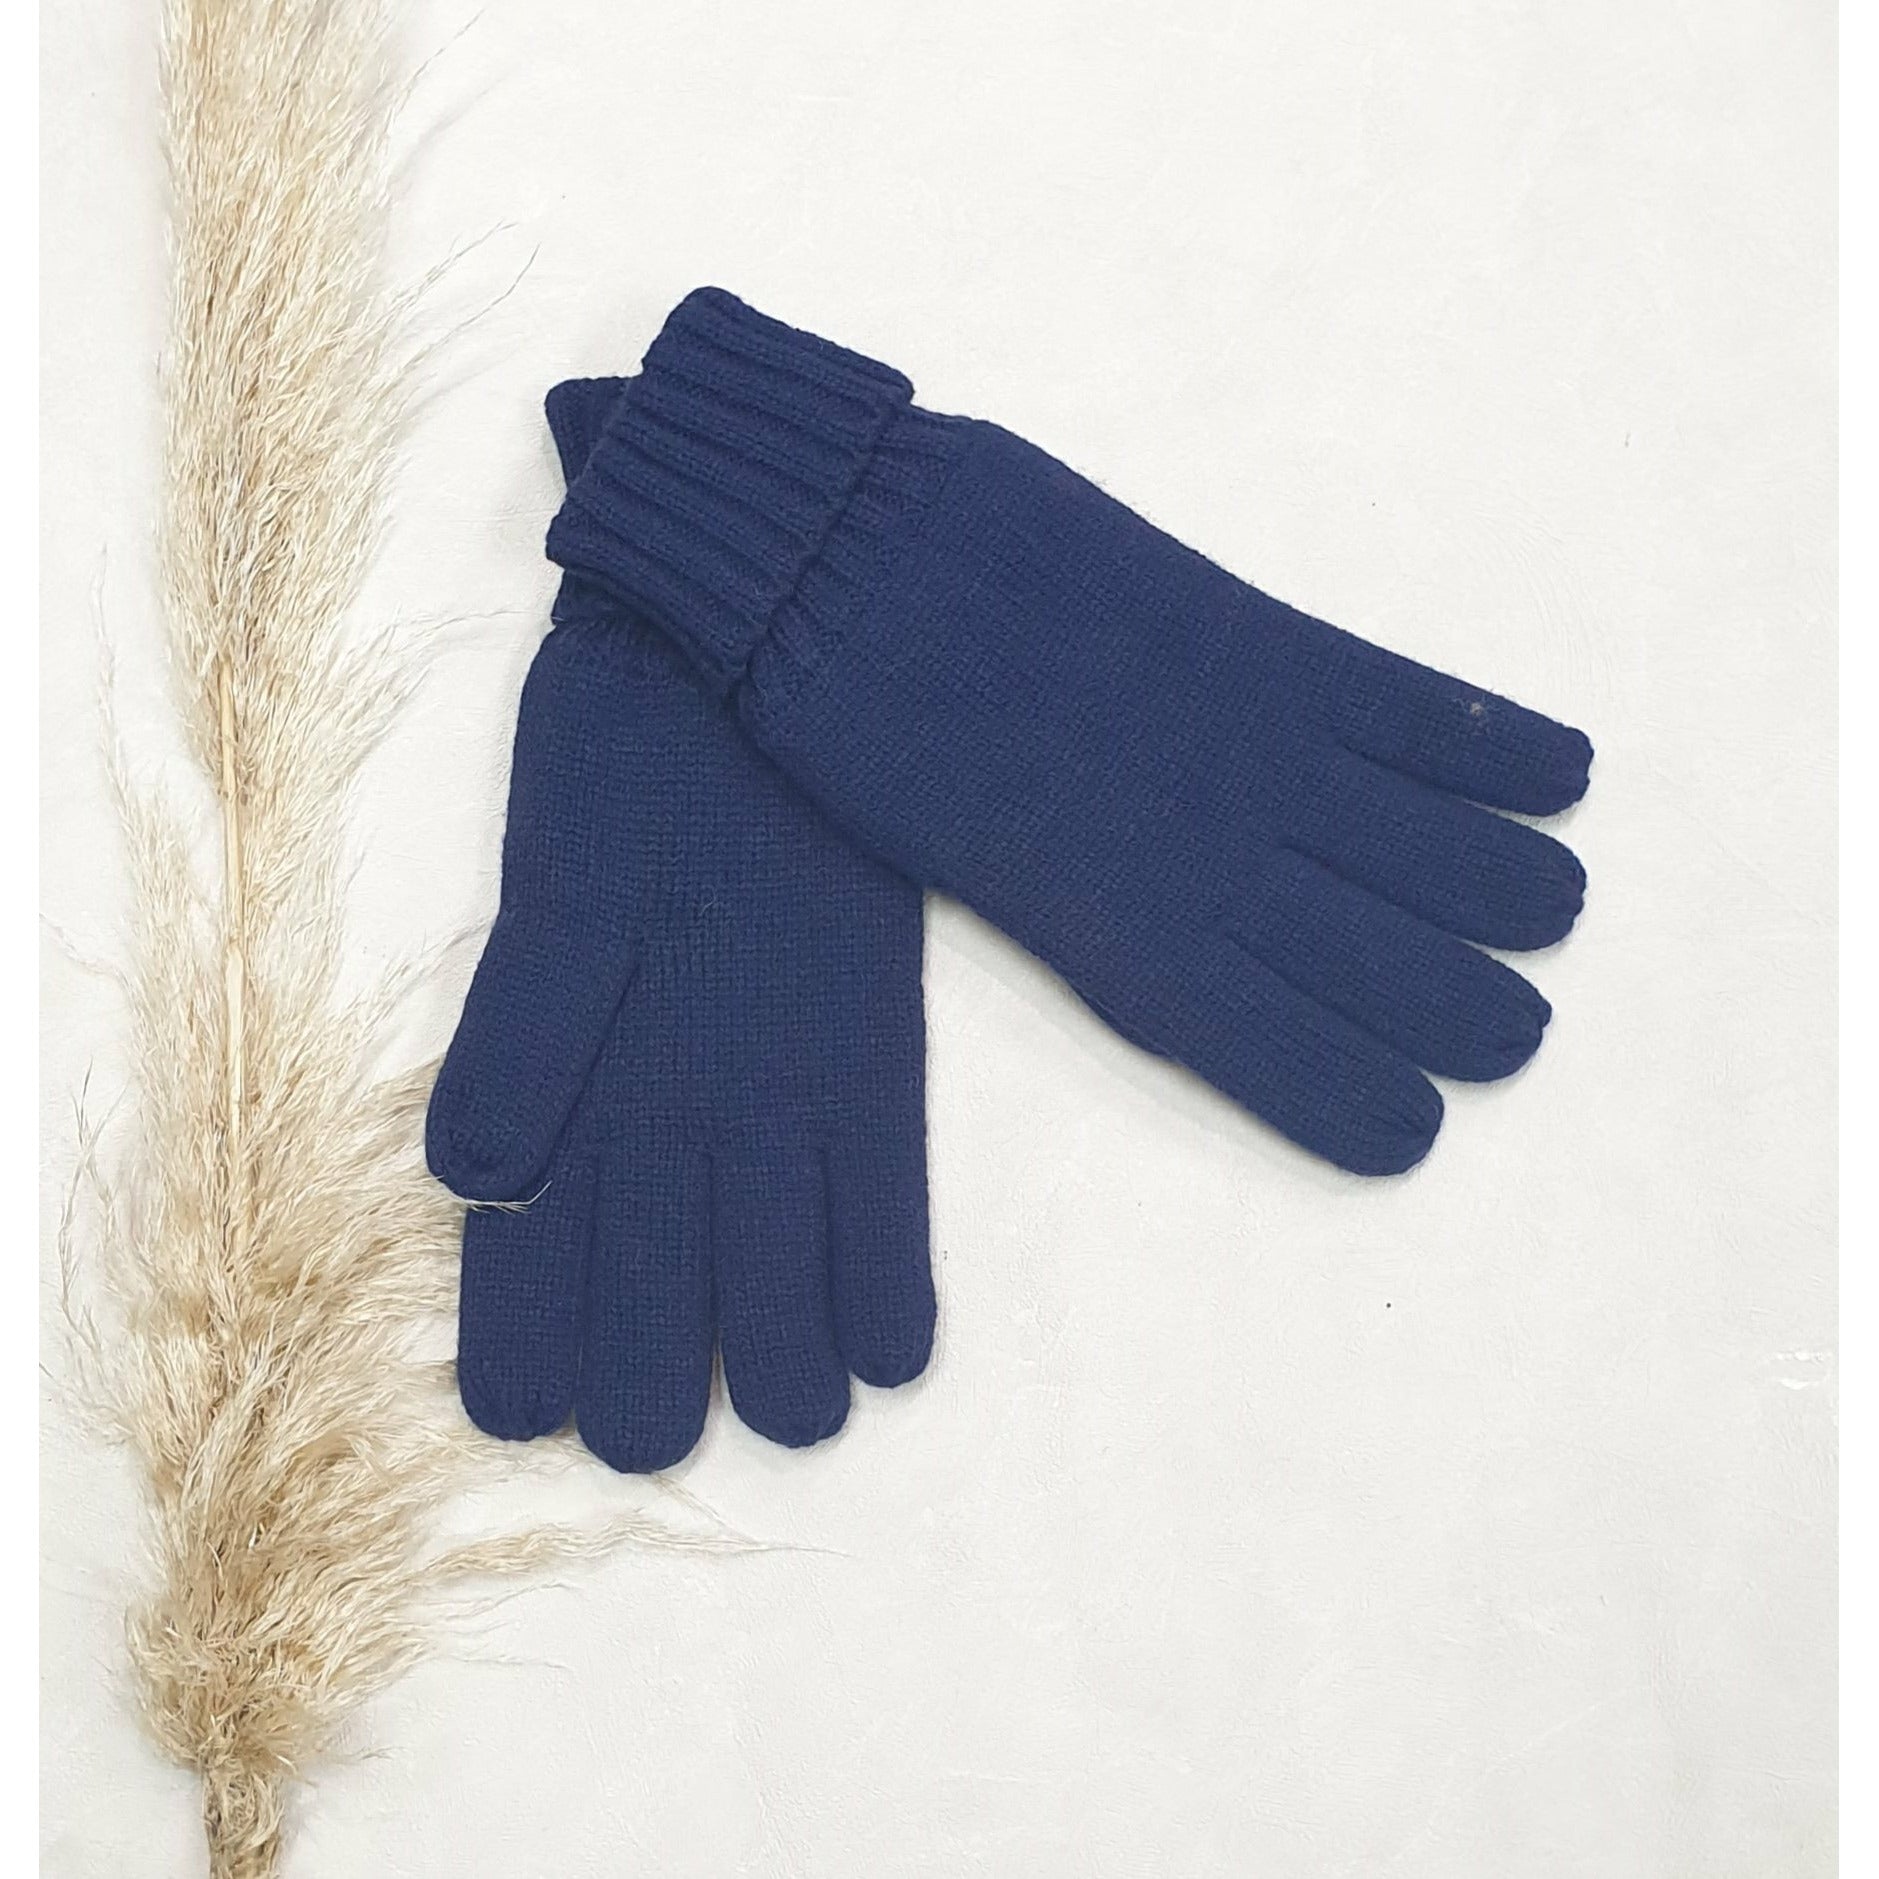 GLOVE FRANZ LINED NAVY Not specified